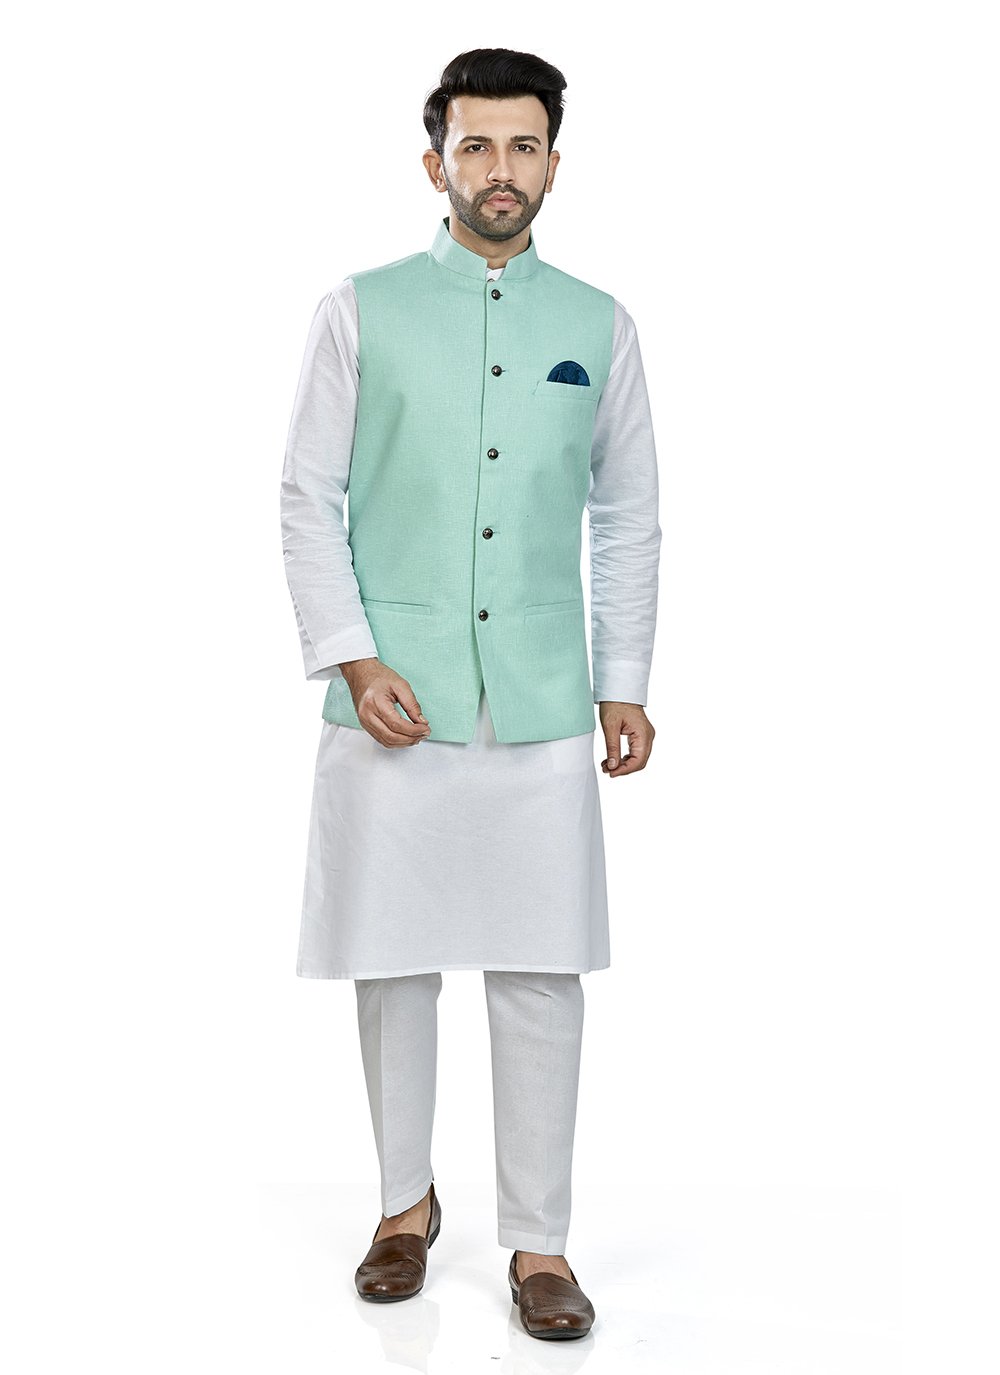 Buttons Linen Kurta Payjama With Jacket in Sea Green and White